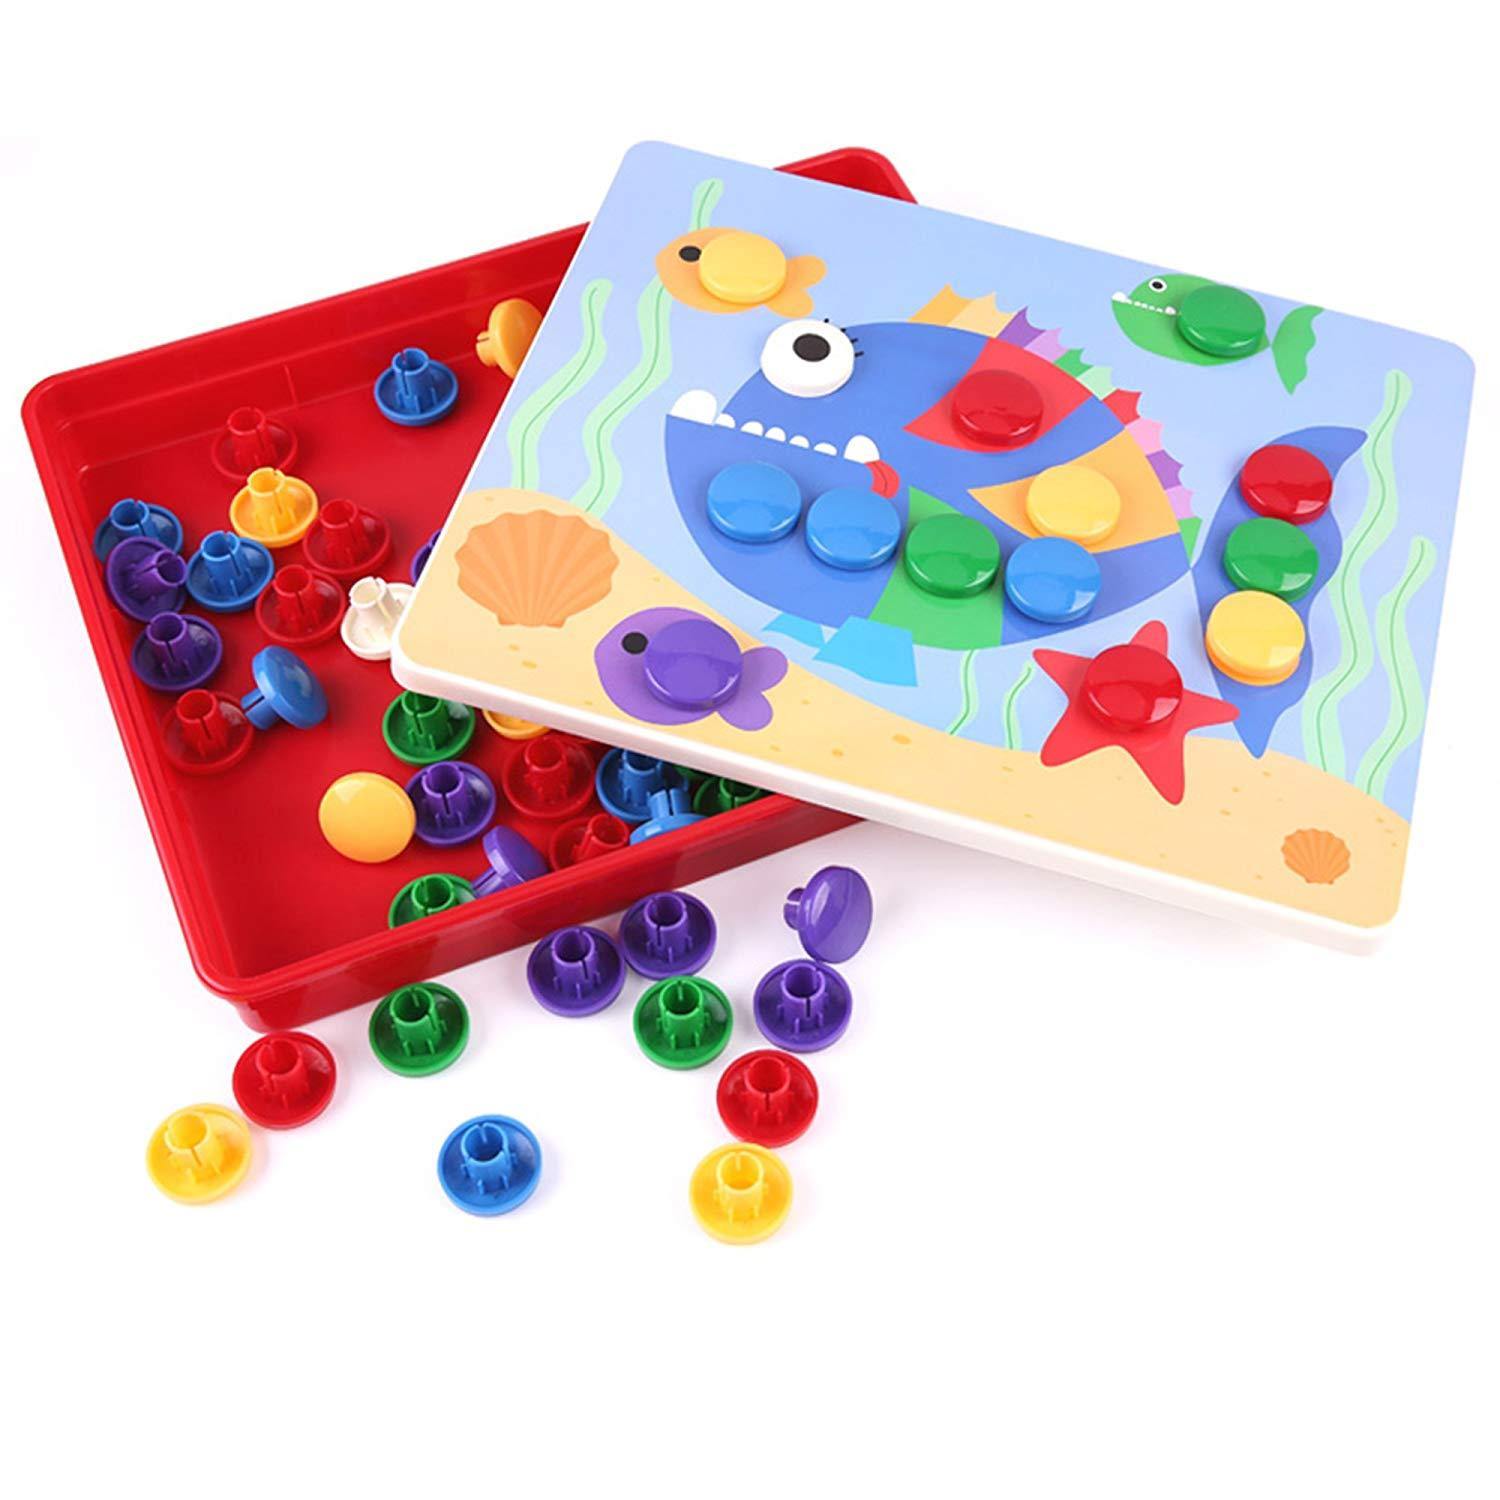 Bosonshop Button Art Color Matching Mosaic Mushroom Nails Pegboard Puzzle Games with 10 Templates